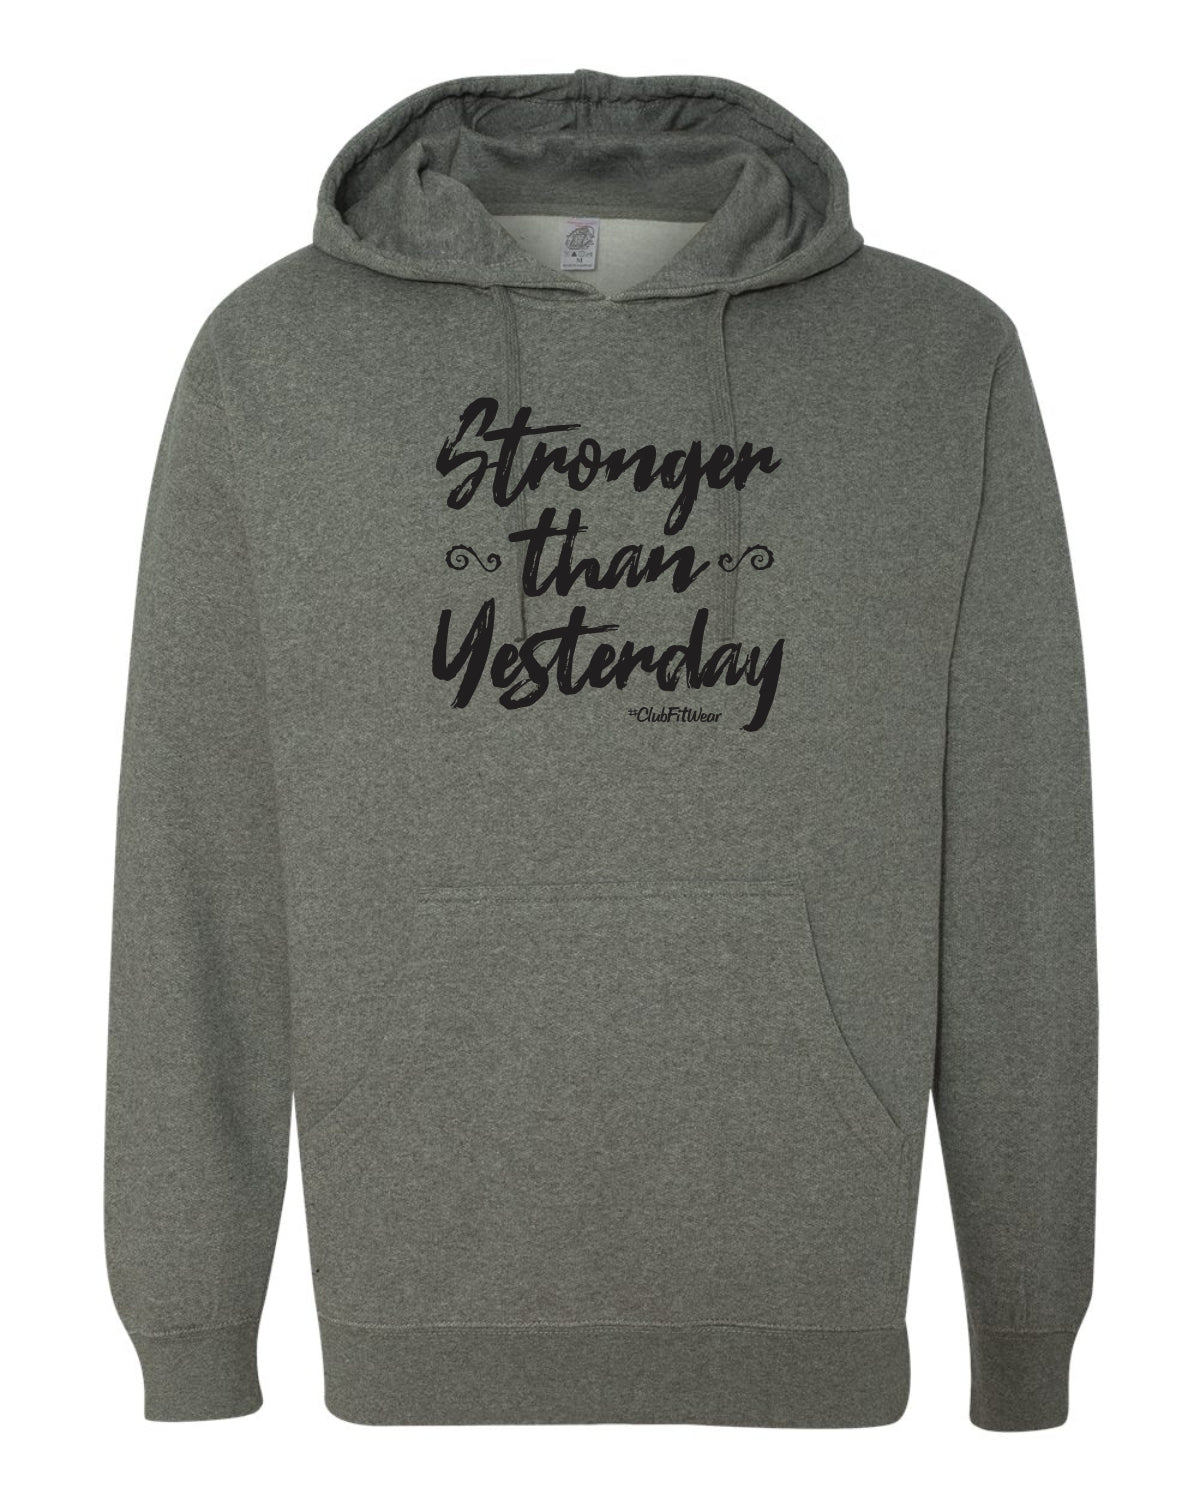 Stronger than Yesterday Hoodie